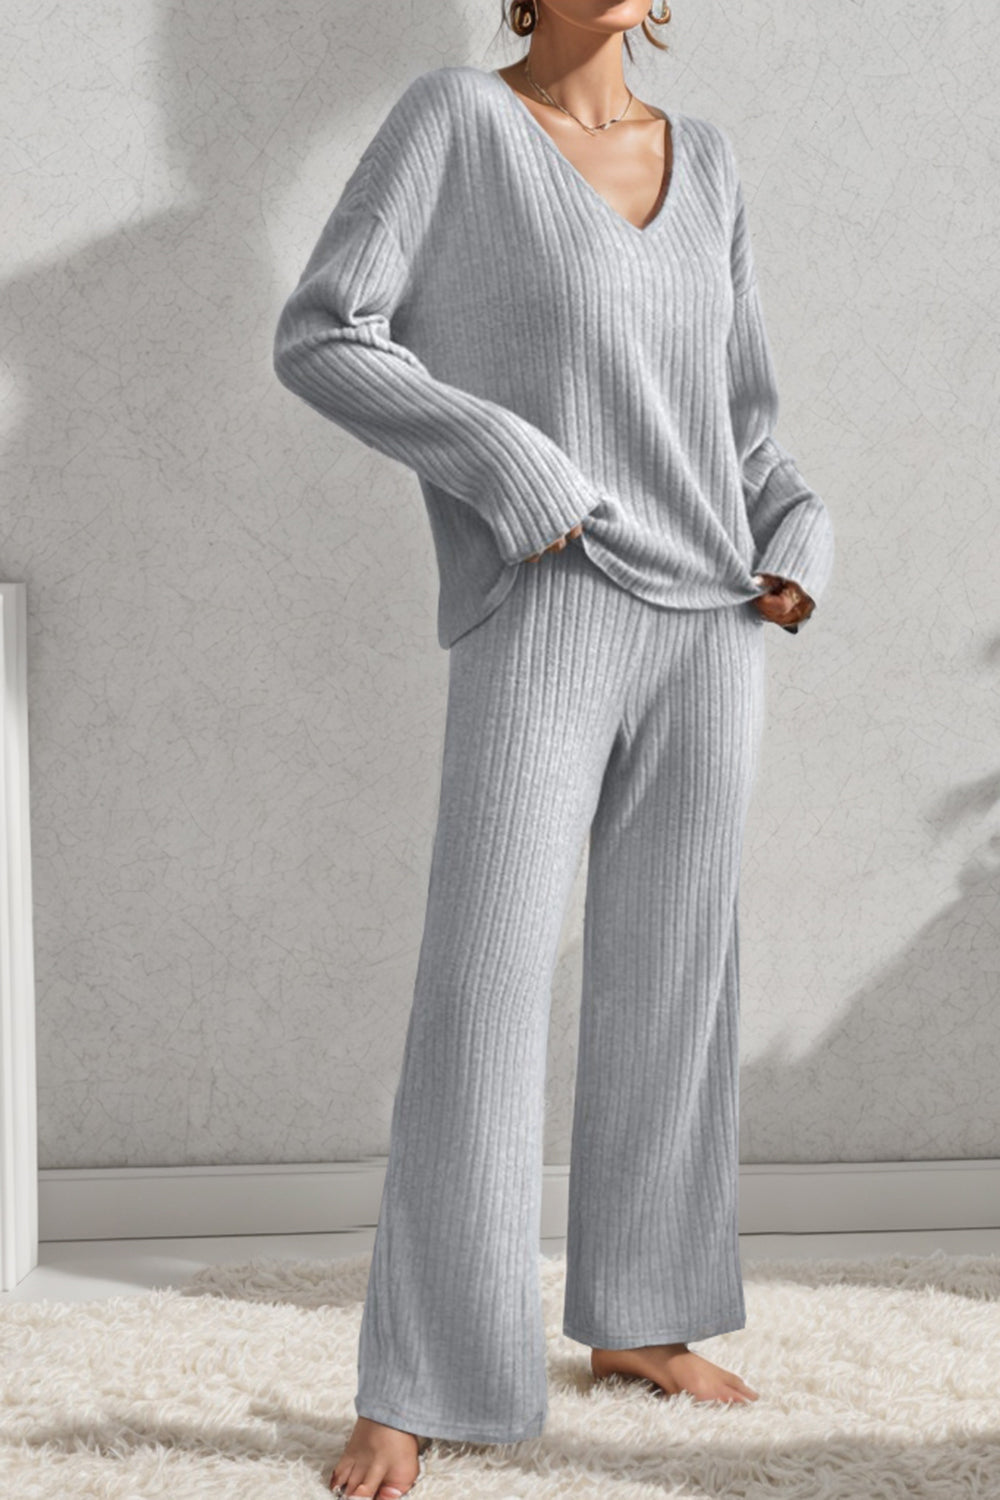 Ribbed V-Neck  Cotton Casual Top and Pants Set